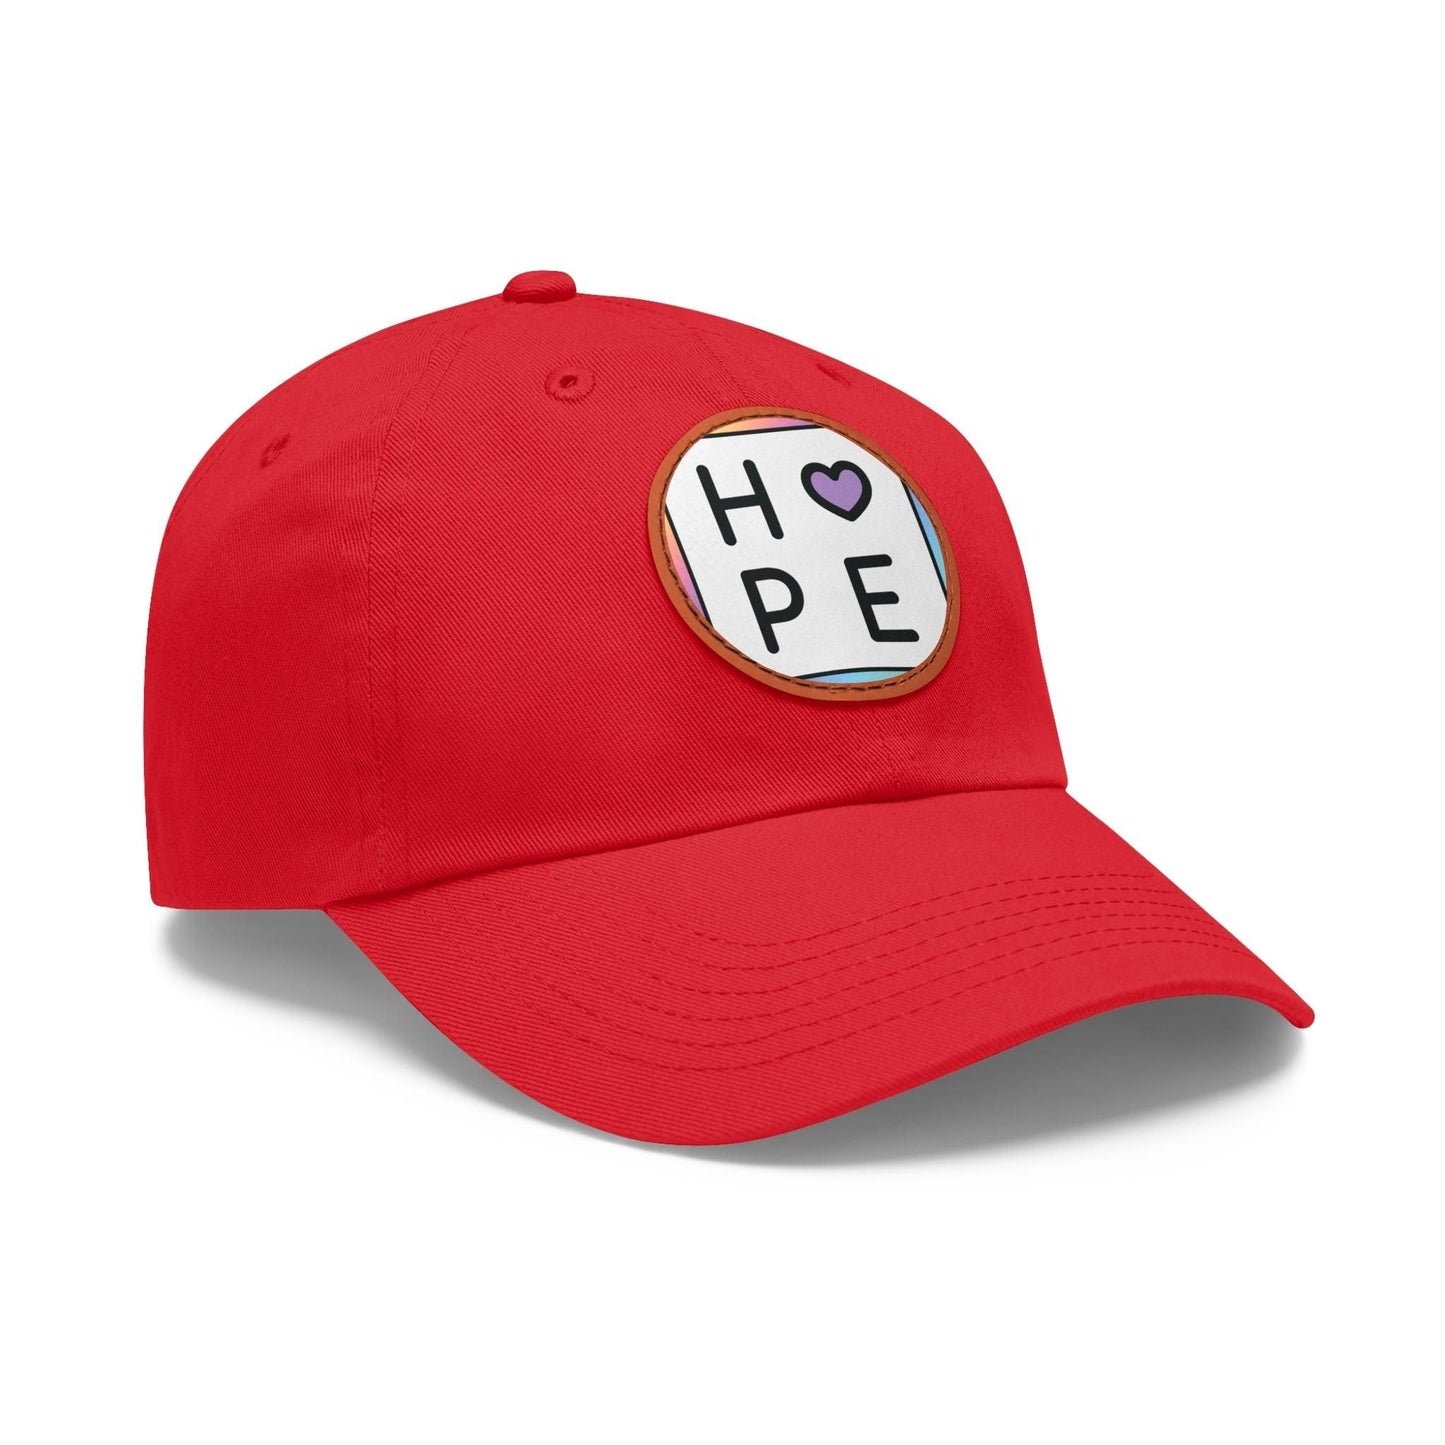 Hope Baseball Cap with Leather Patch Cap Red / Light Brown patch Circle One size